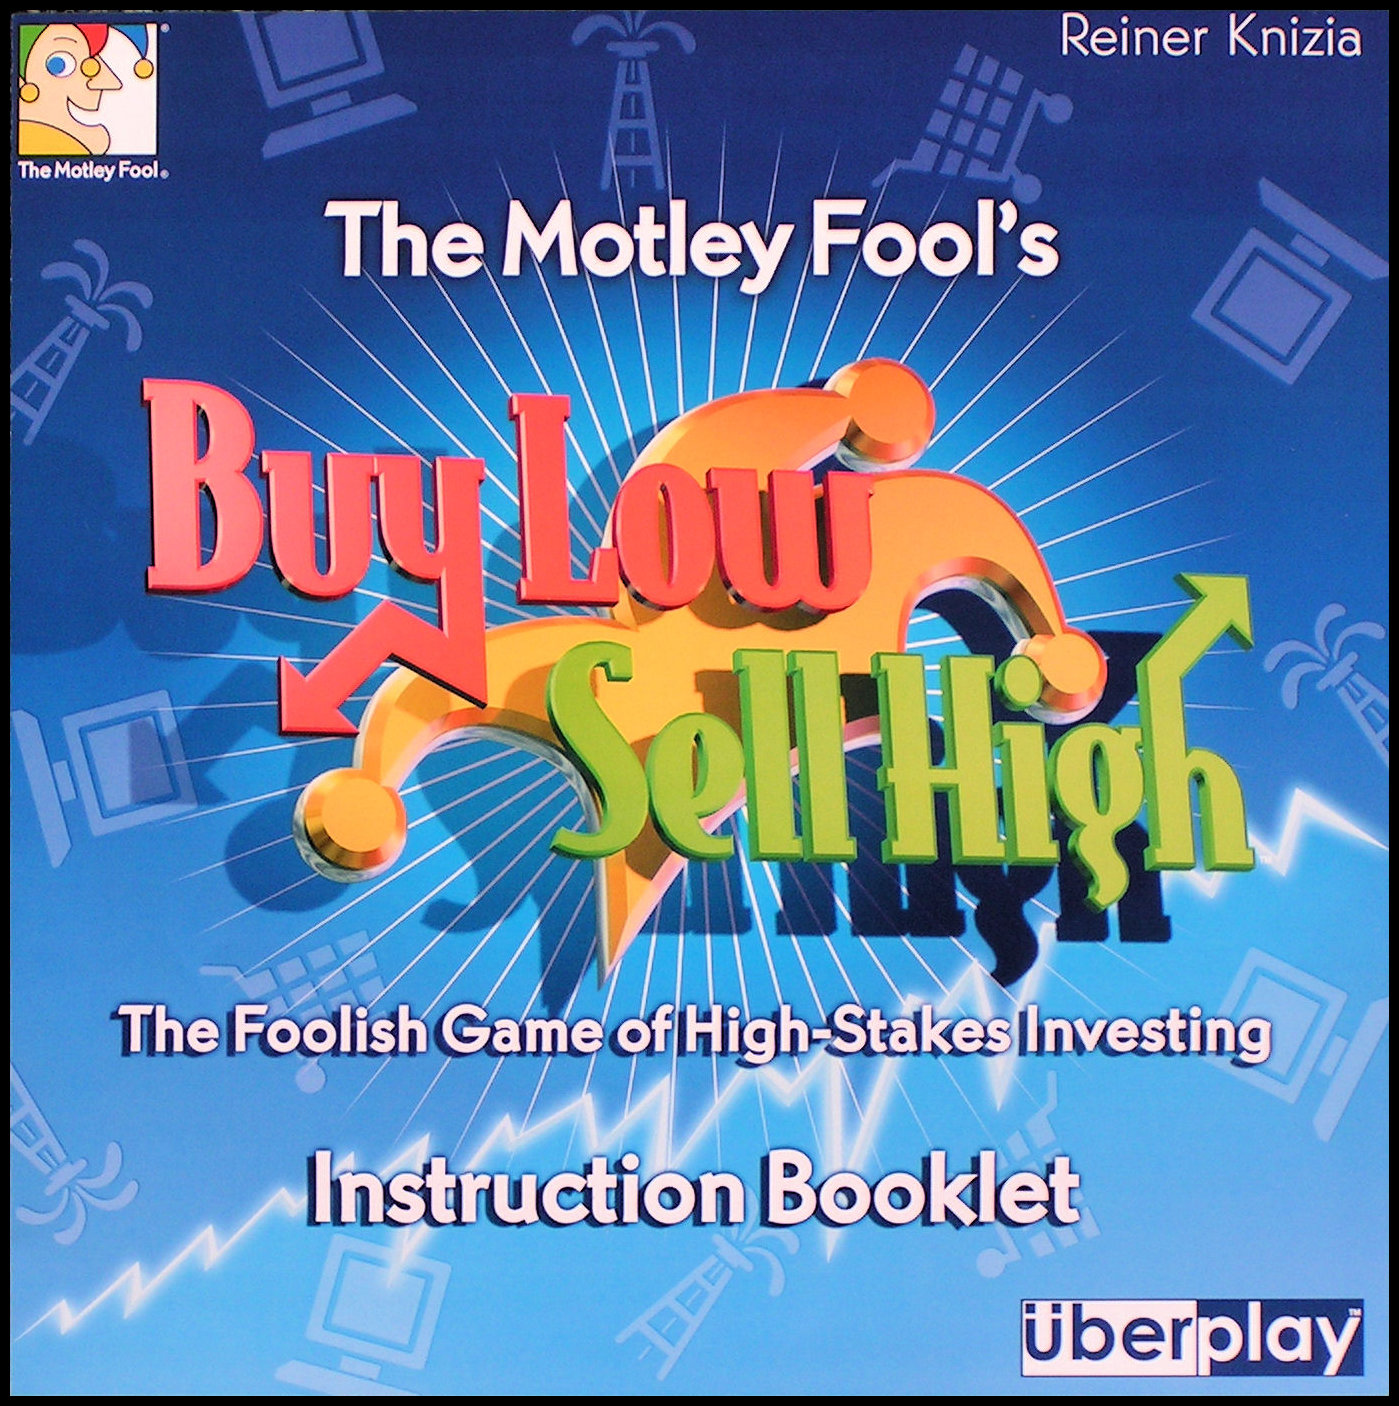 Buy Low, Sell High - Rulebook Cover